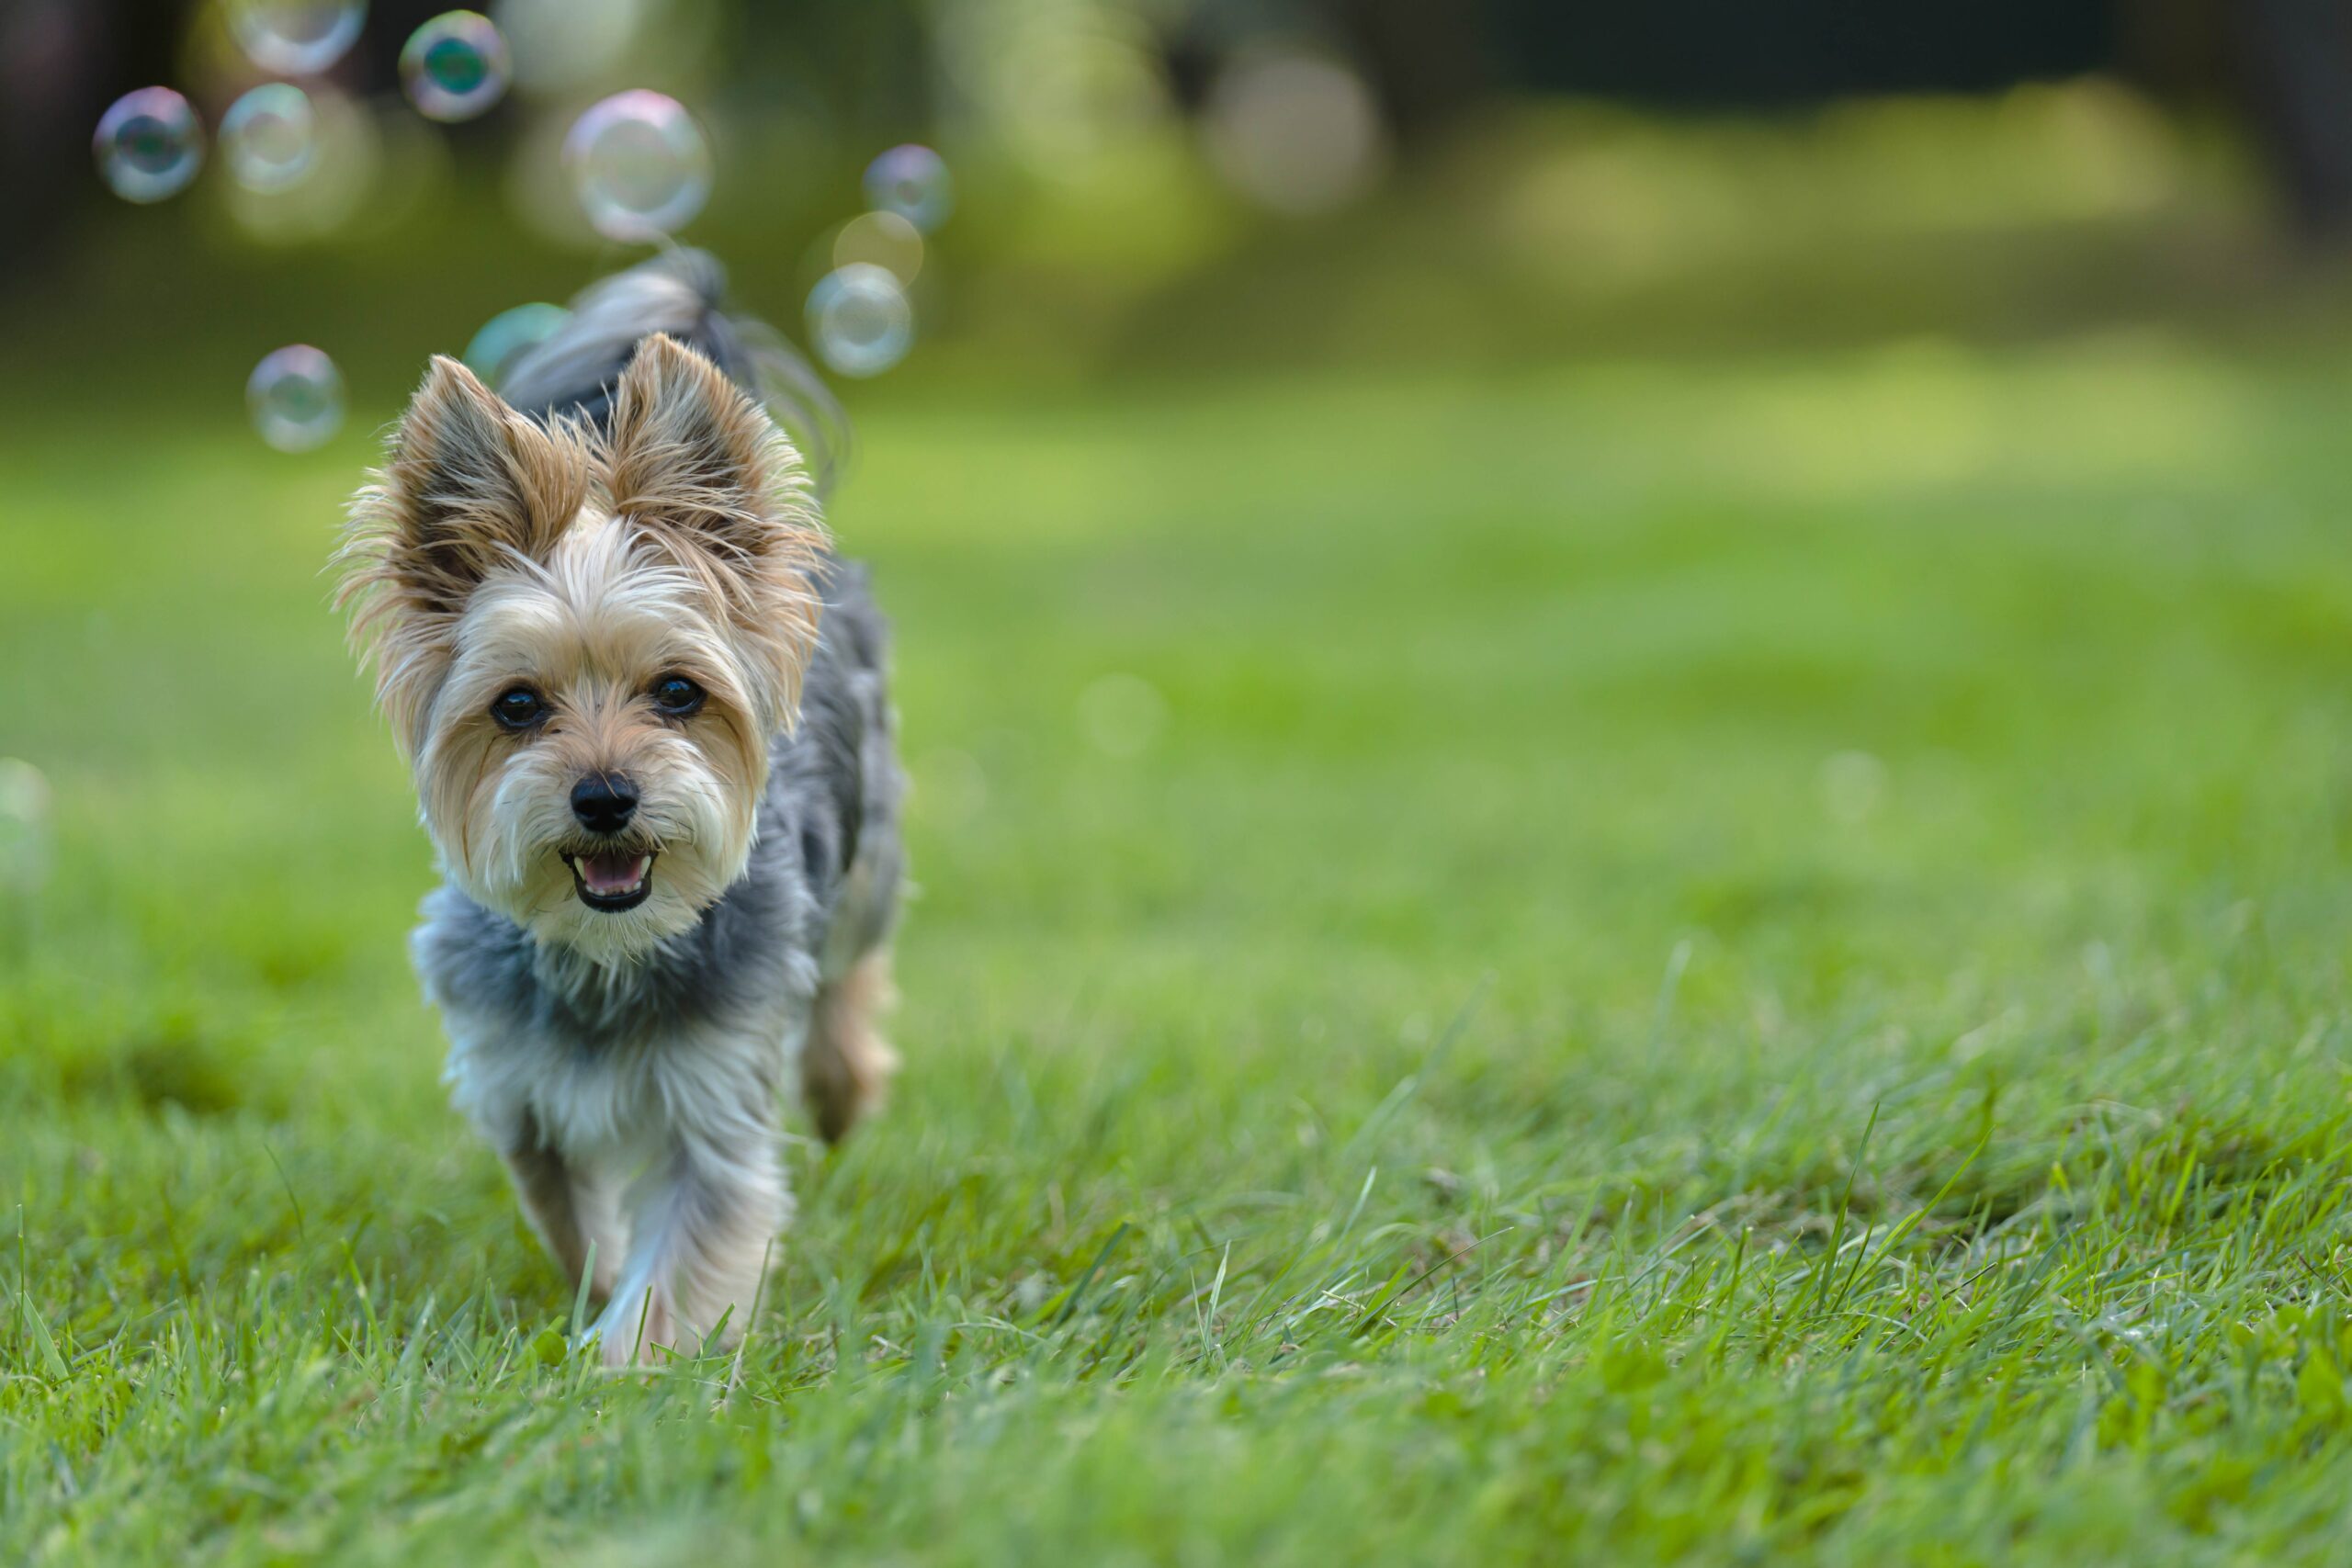 Yorkie walking in the grass towards bubbles.